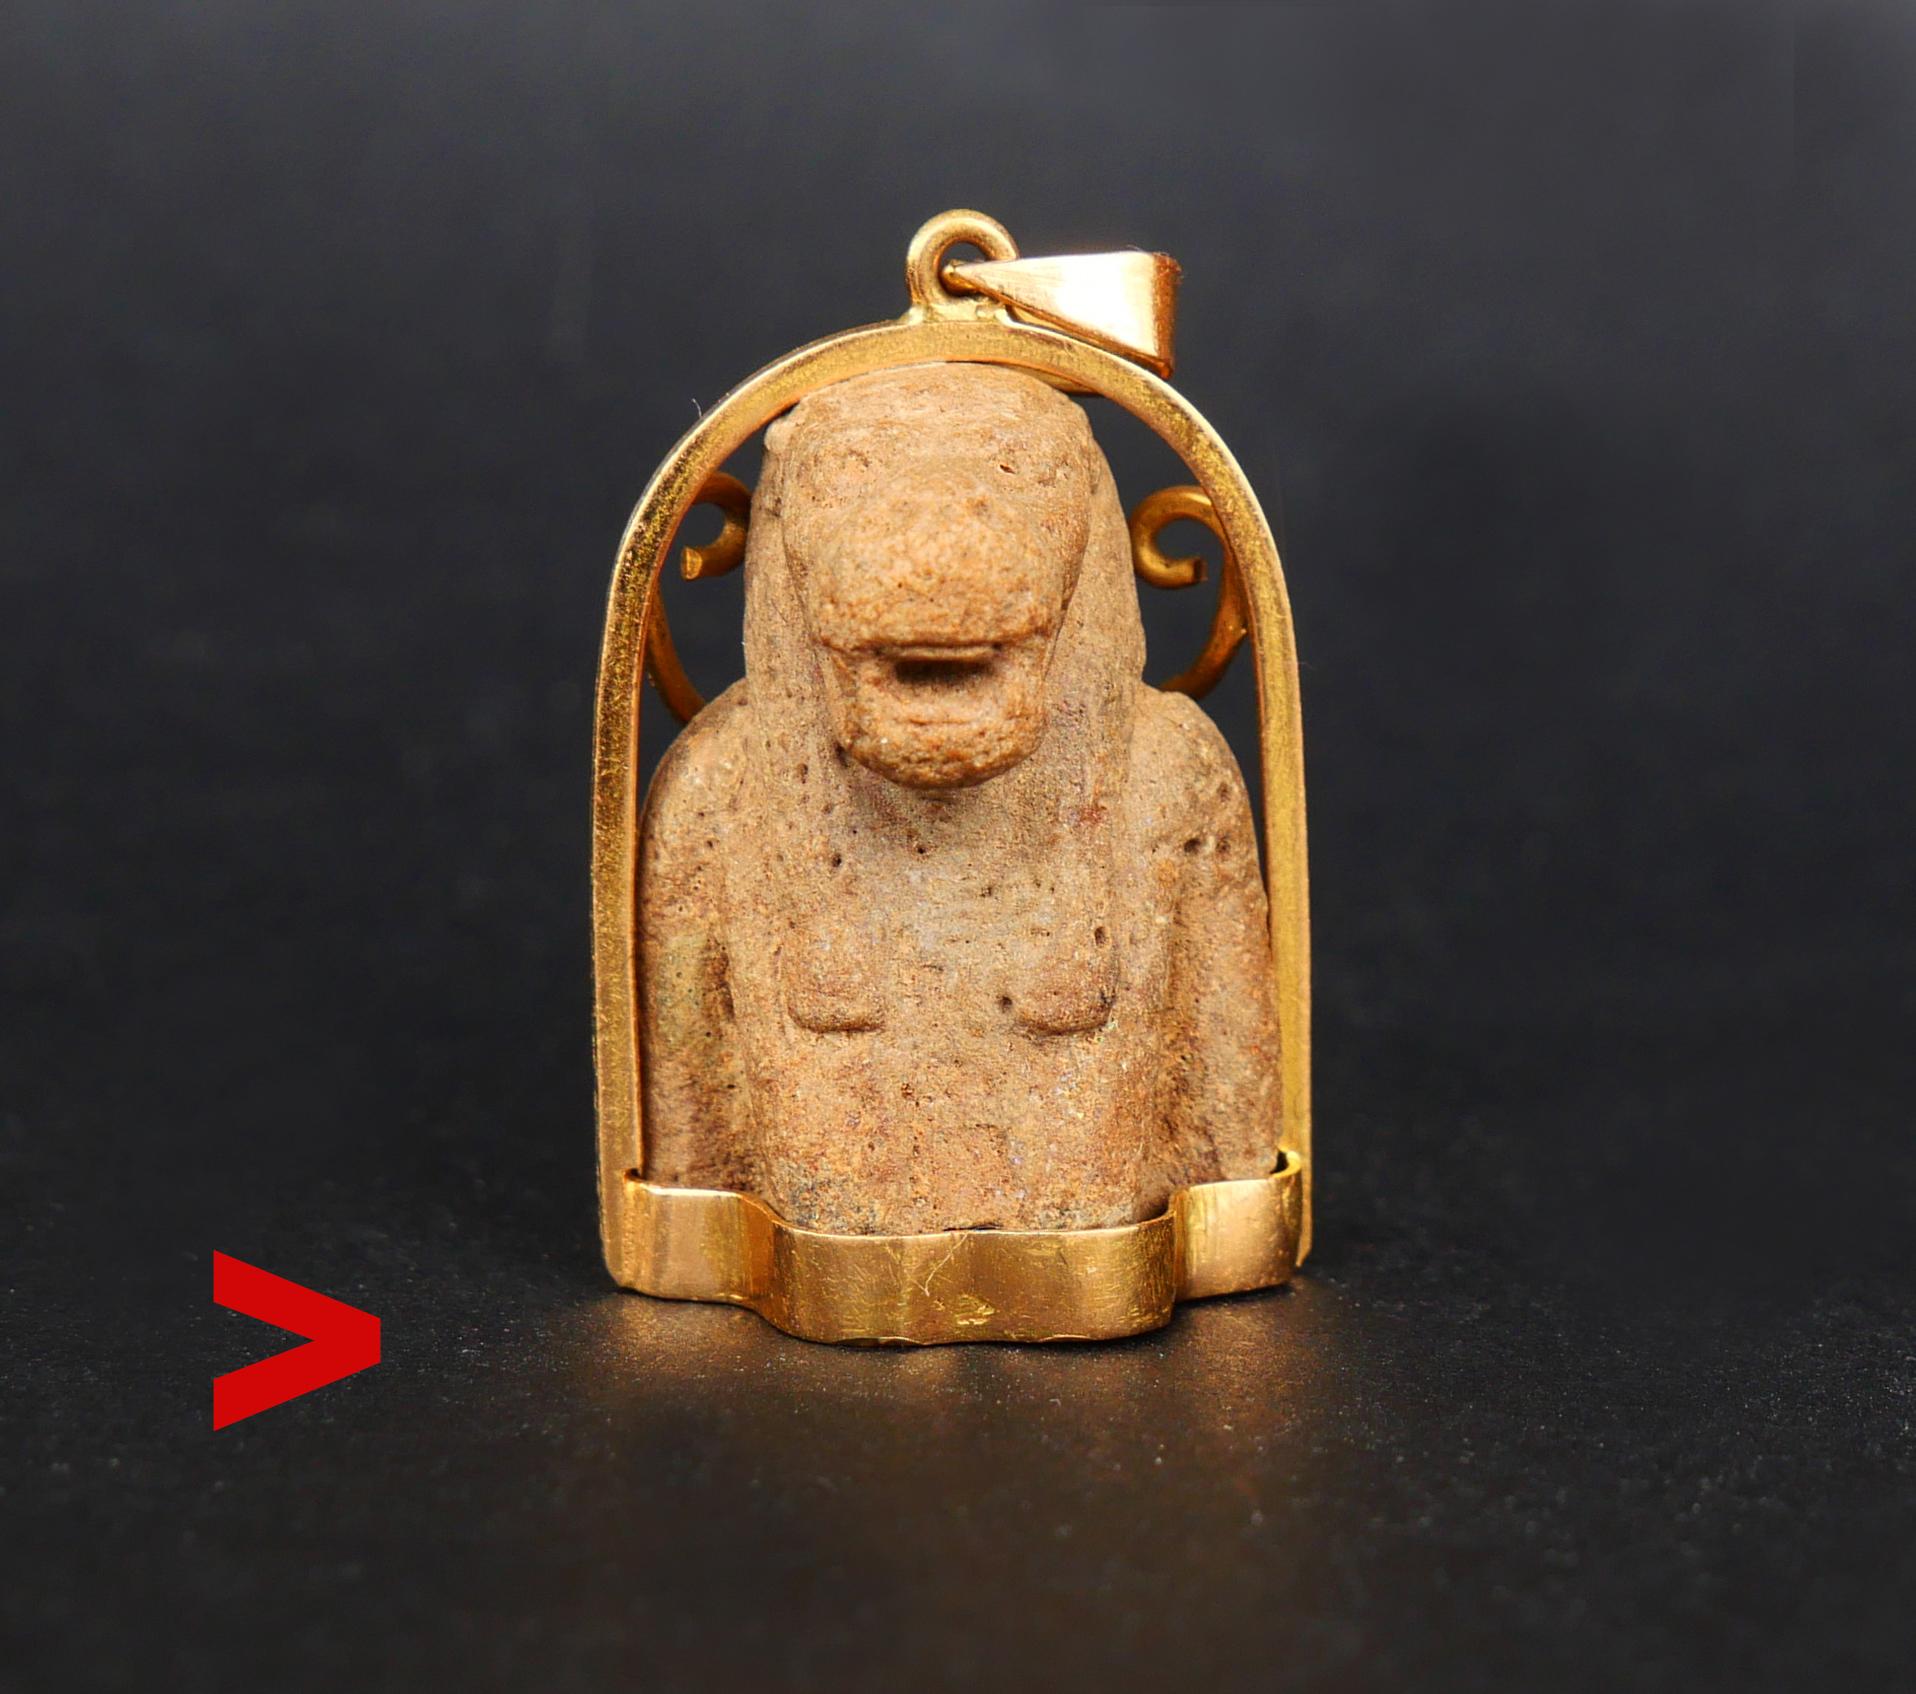 
Ancient ,at least 2000 years old (or much older) original pendant of Taweret - protective ancient Egyptian goddess of childbirth and fertility later mounted in solid 18K gold frame. Material is fiance or carved limestone.

This amulet had been in